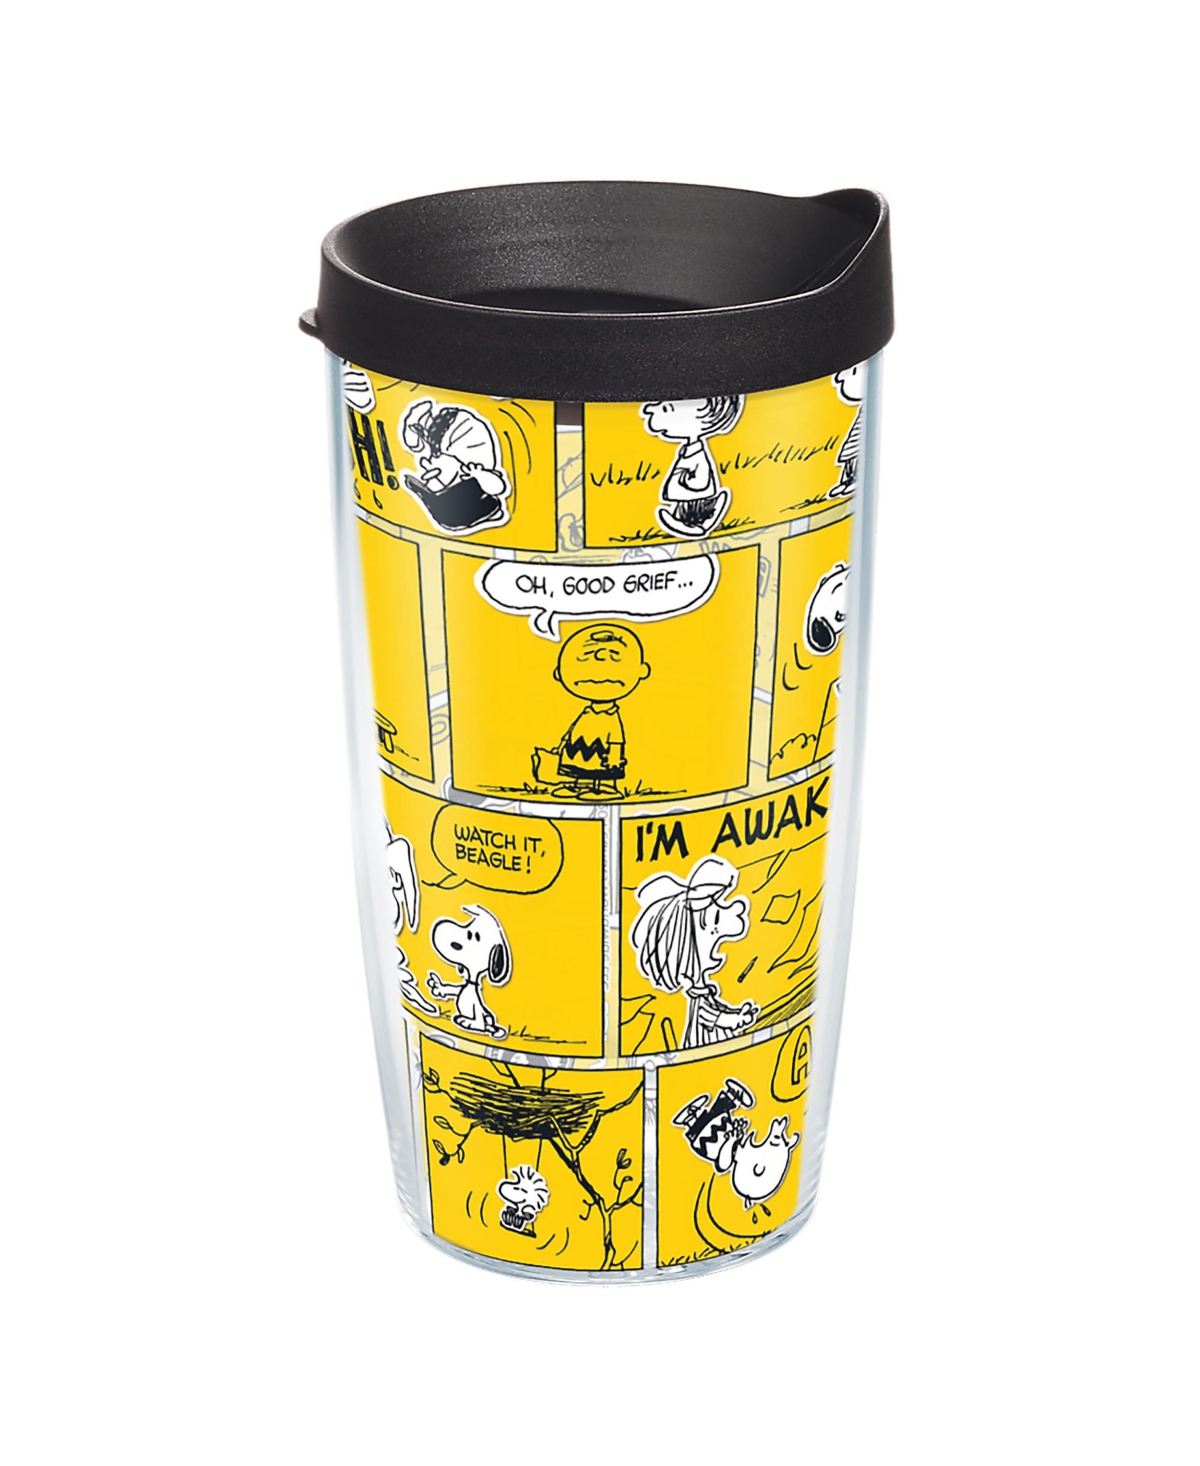 Tervis Tumbler Tervis Peanuts - 70th Comic Strip Made In Usa Double Walled Insulated Tumbler Travel Cup Keeps Drink In Open Miscellaneous